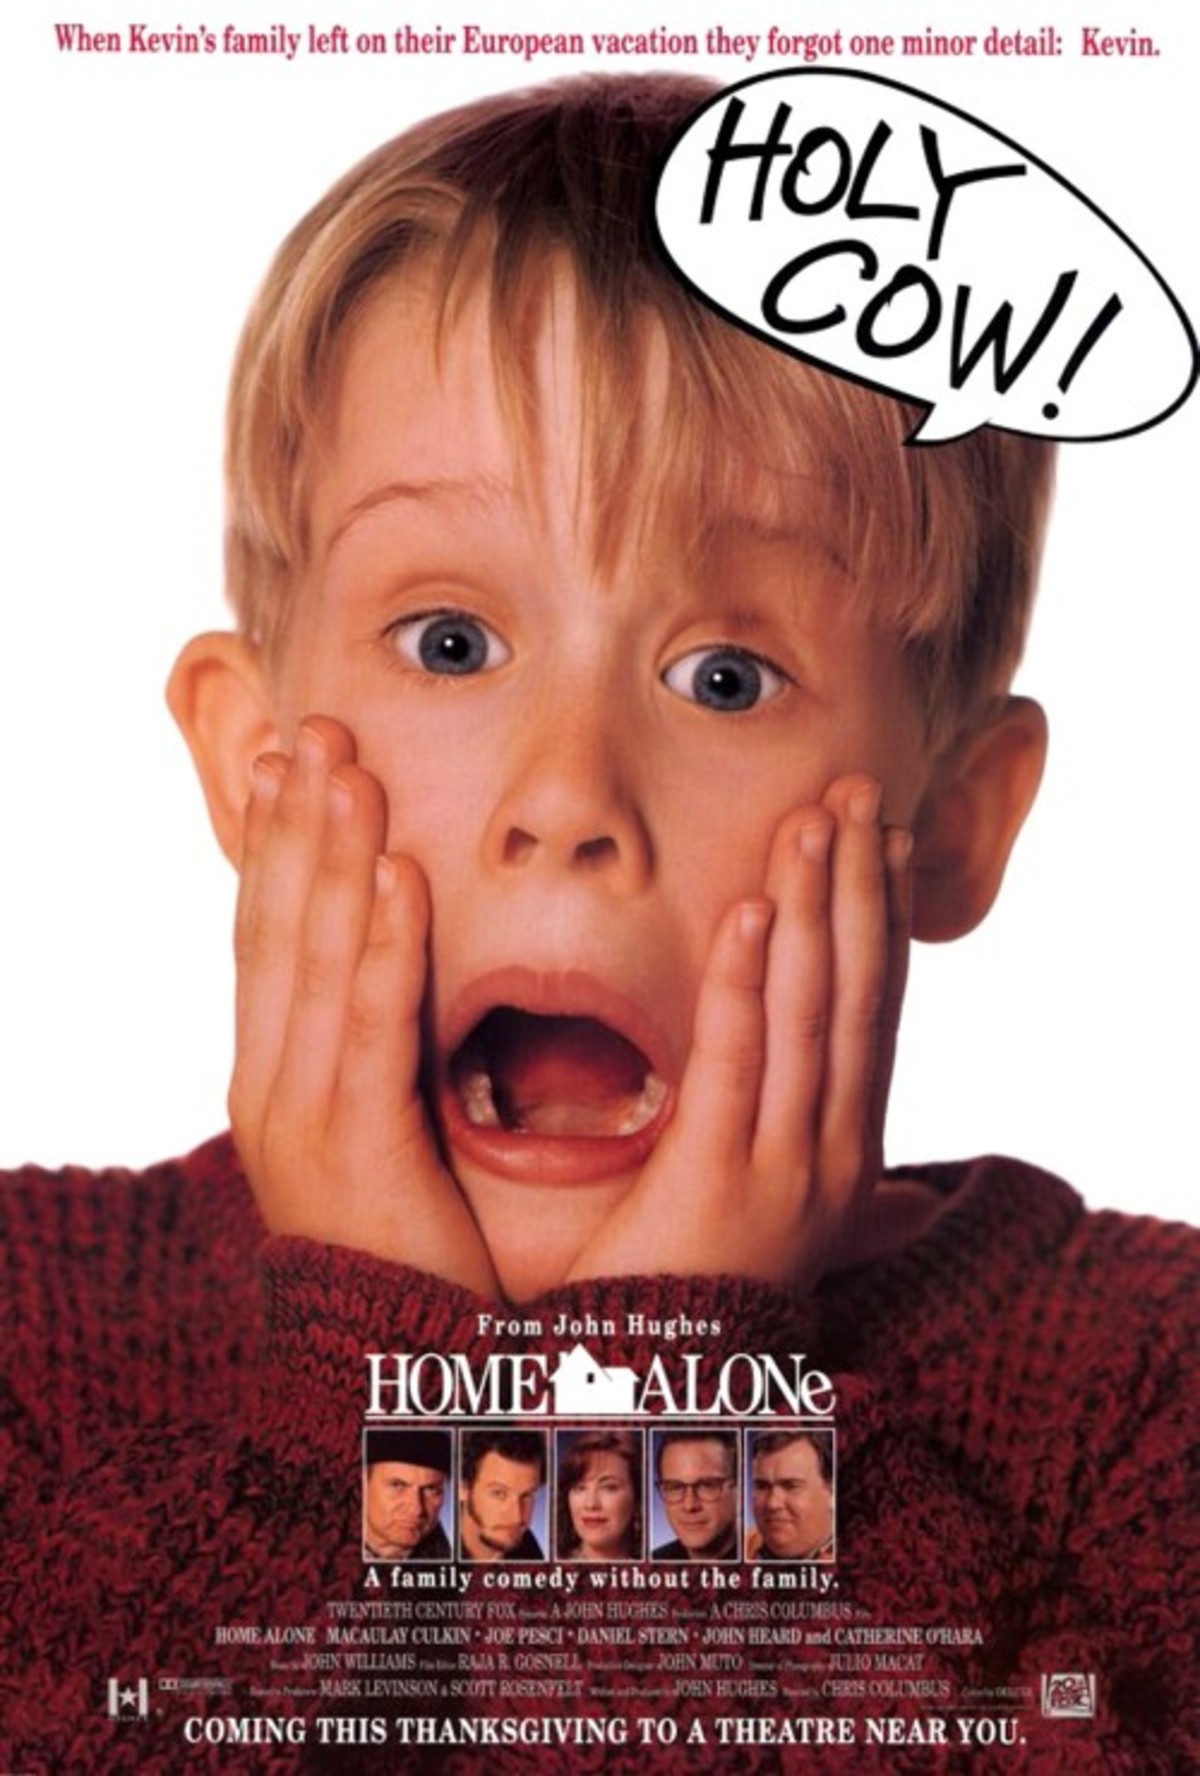 “Home Alone” Will Return to Theaters for the Film’s 25th Anniversary